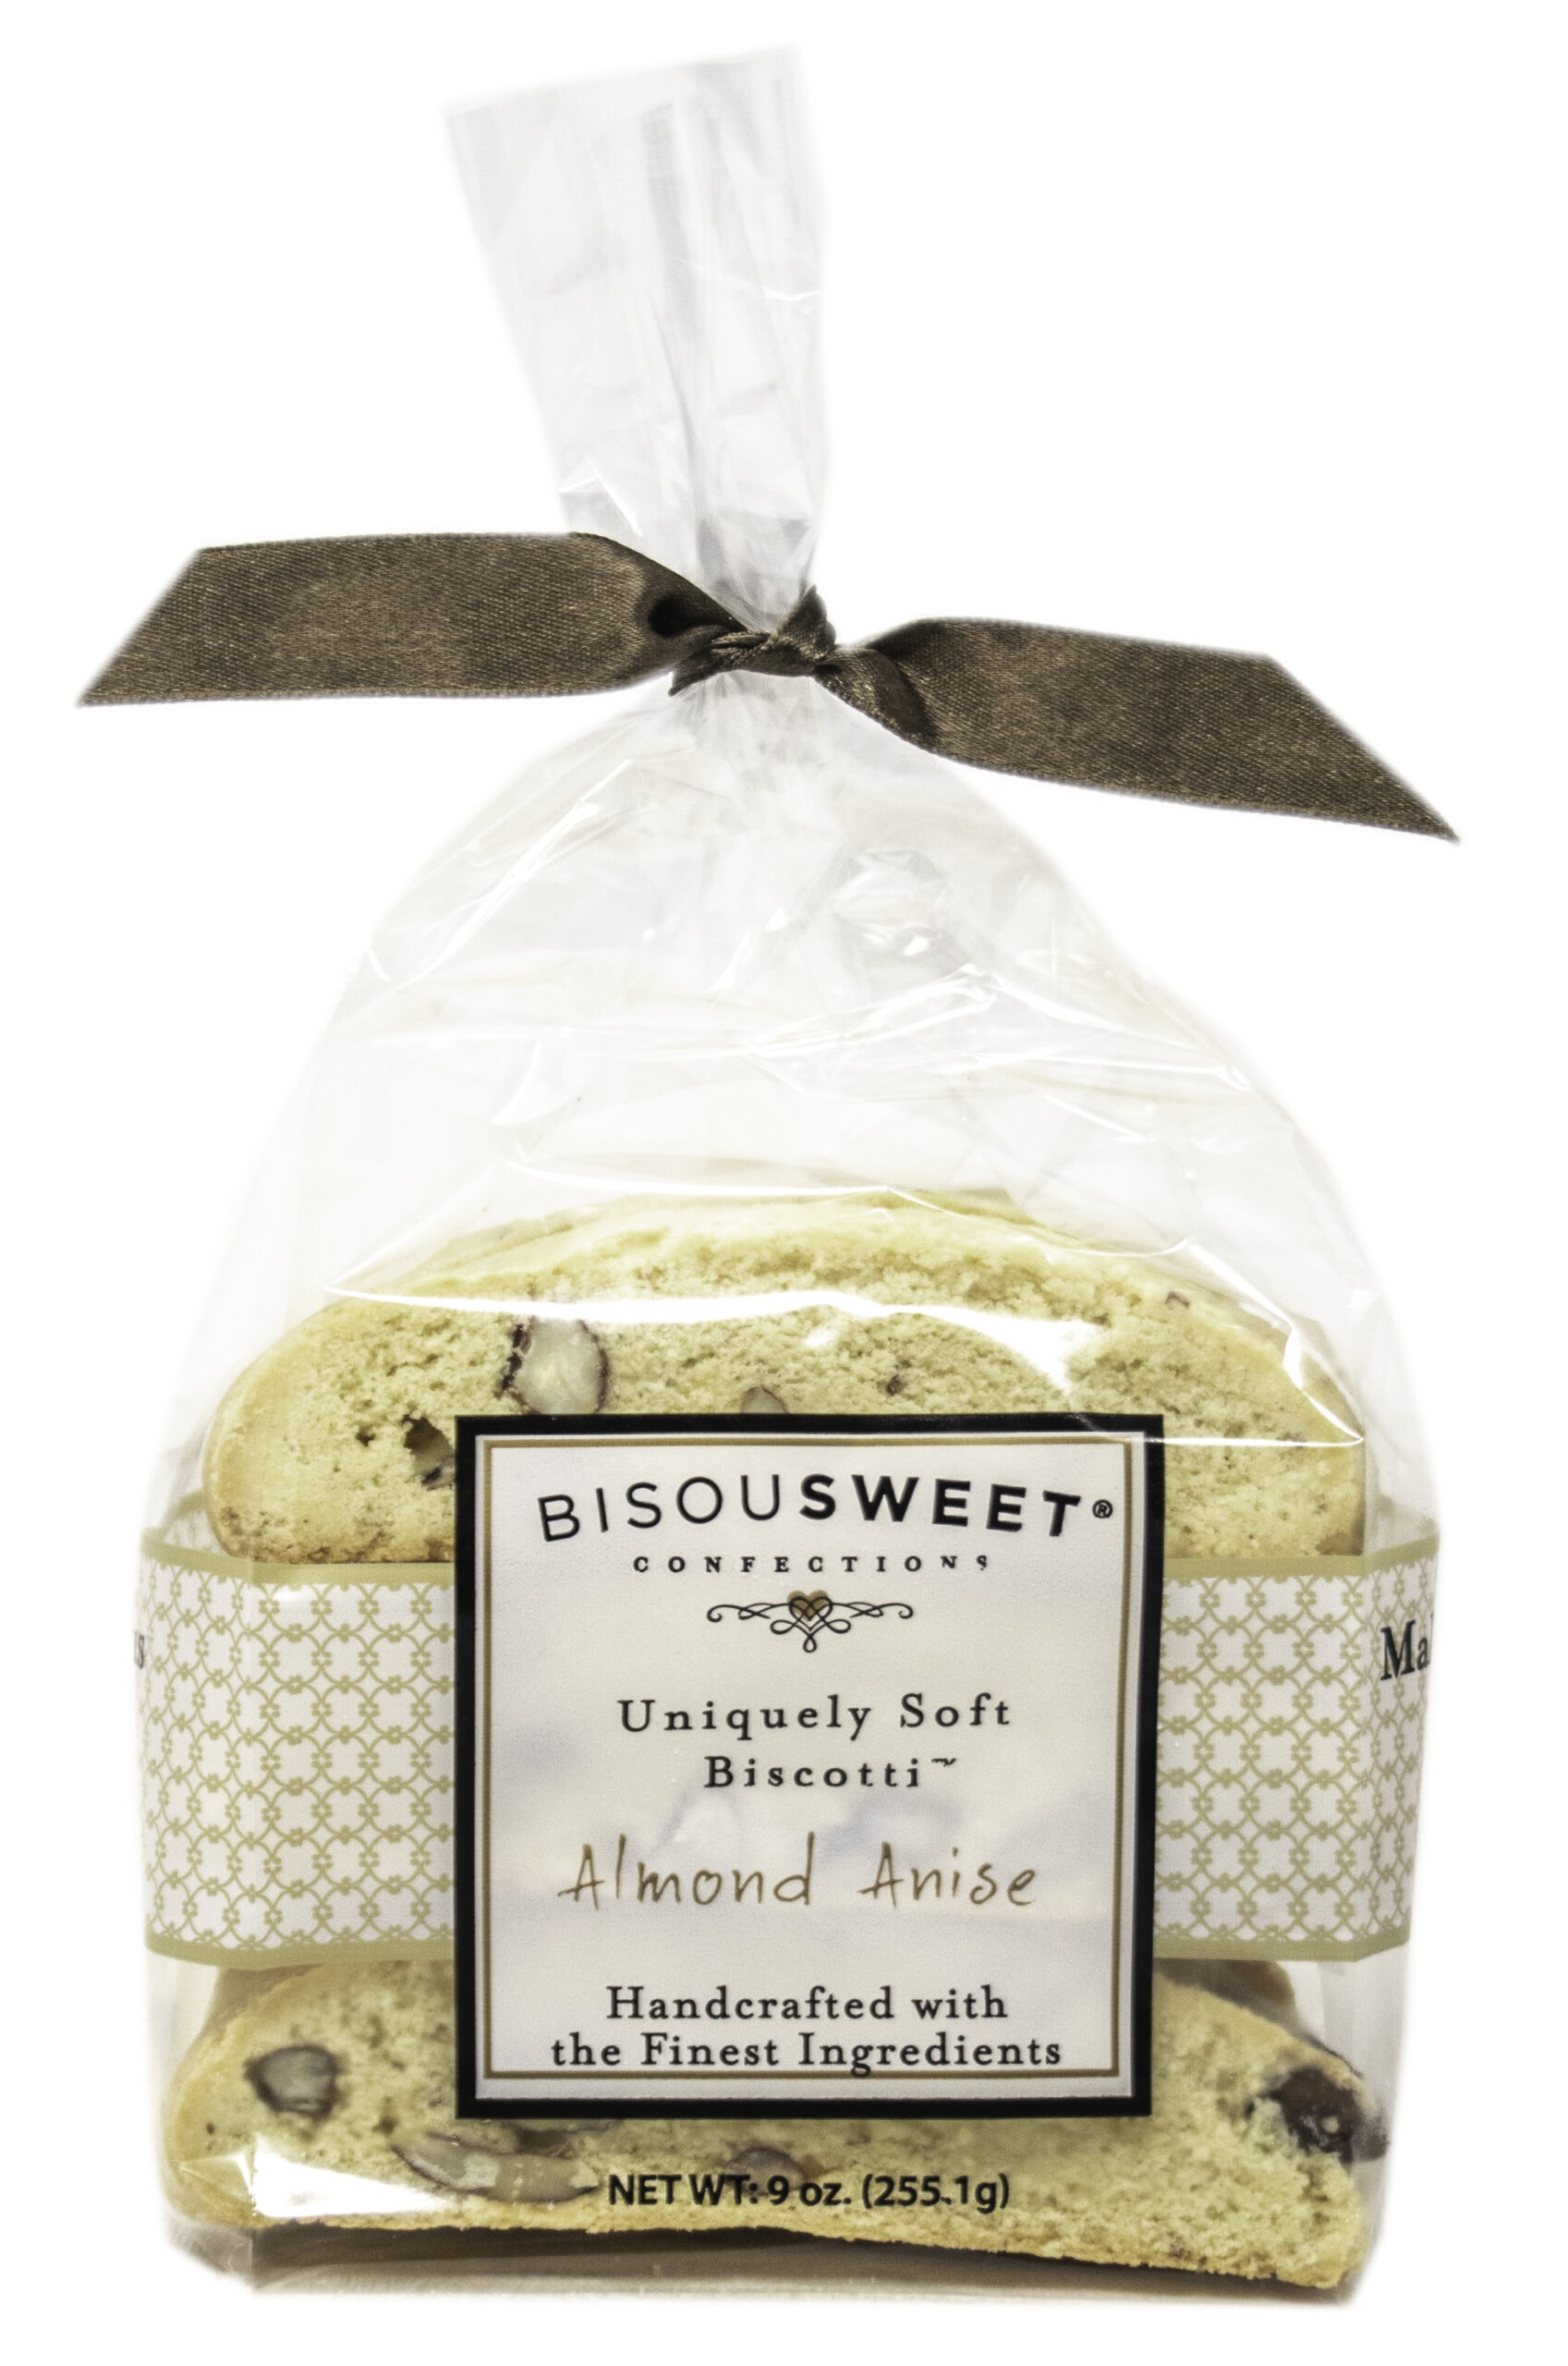 Almond Anise Biscotti - Bisousweet Confections